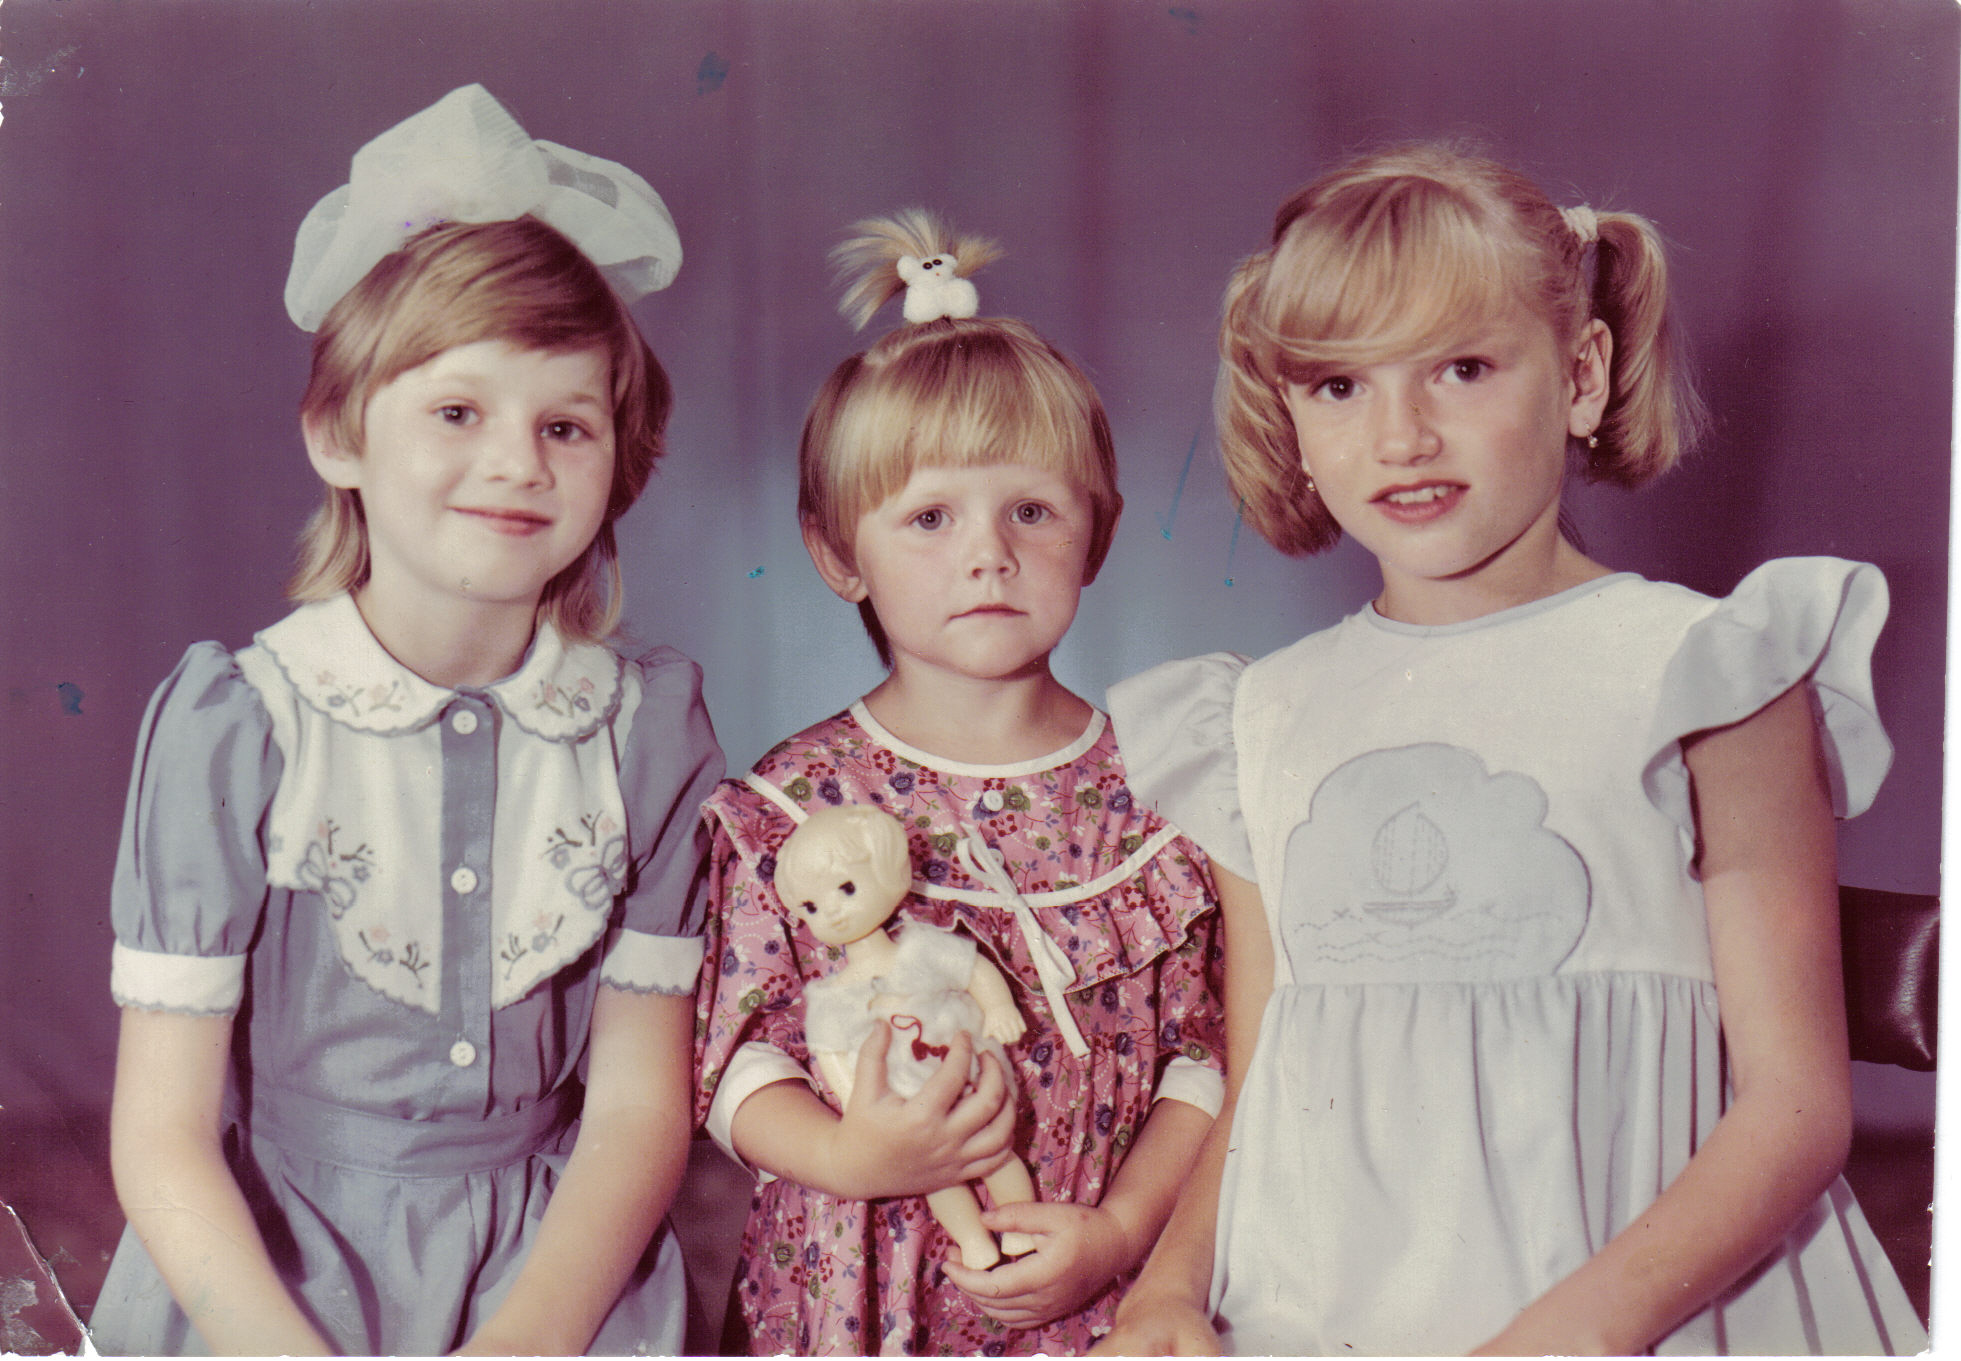 three girls dressed in matching clothing are standing side by side